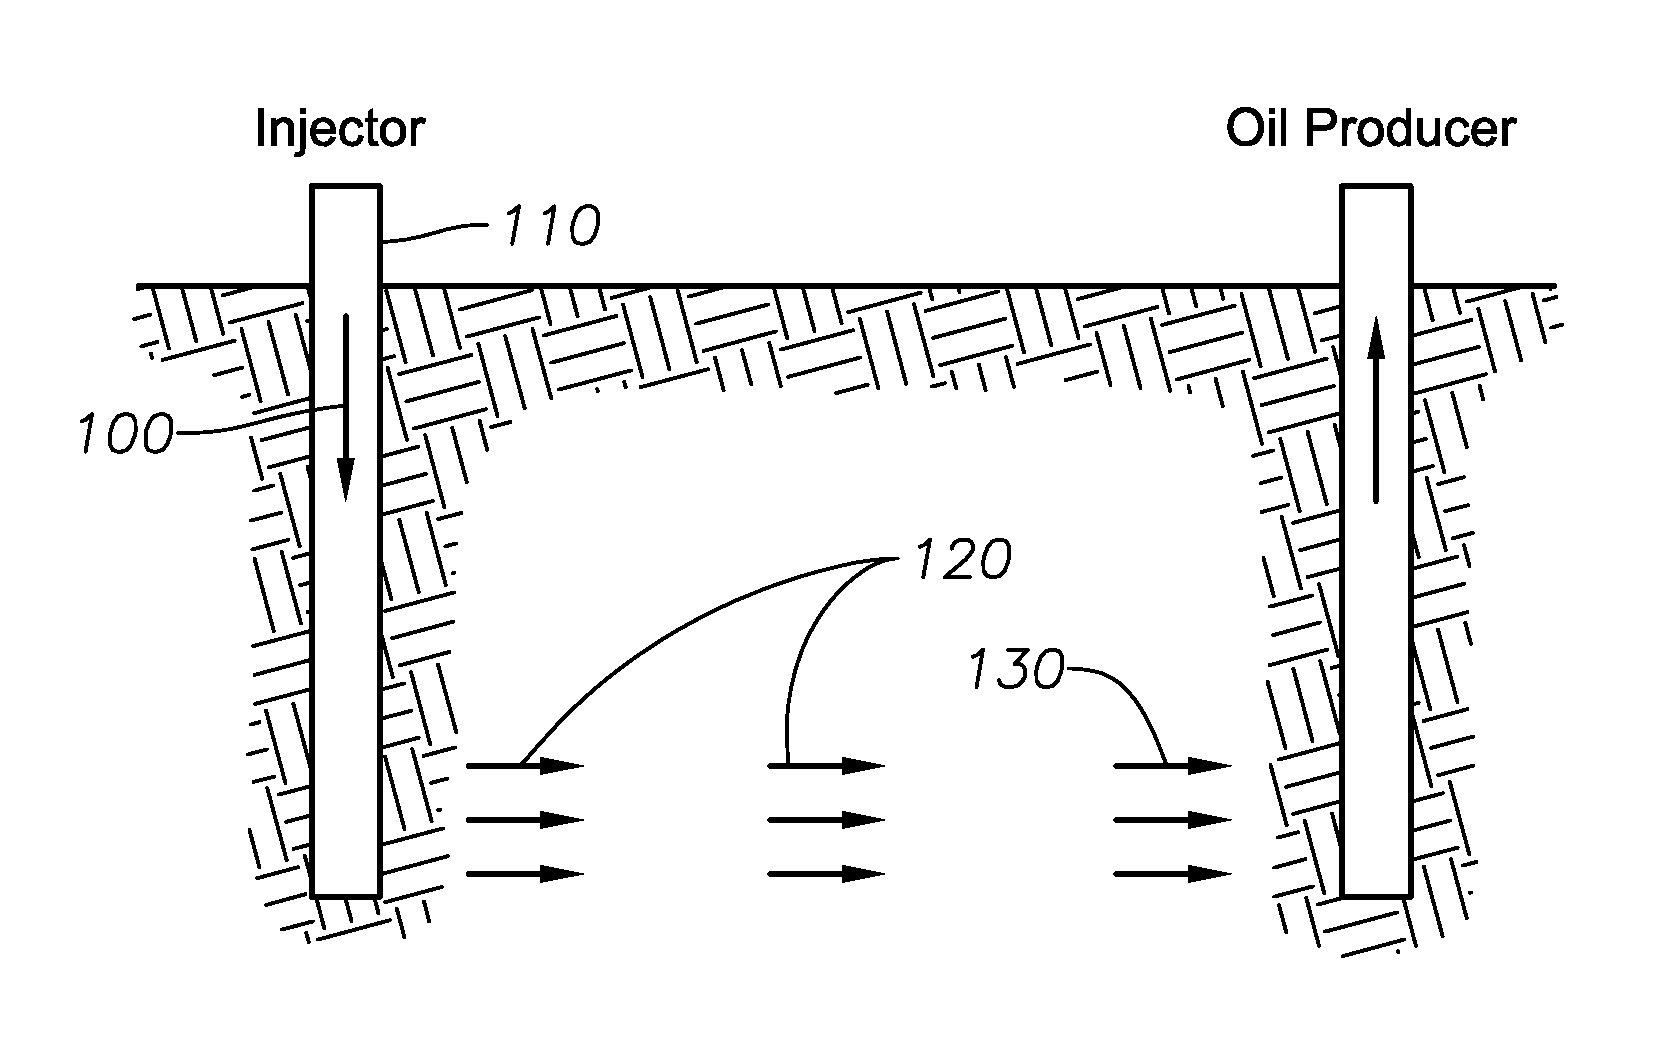 Enhanced oil recovery by in-situ steam generation